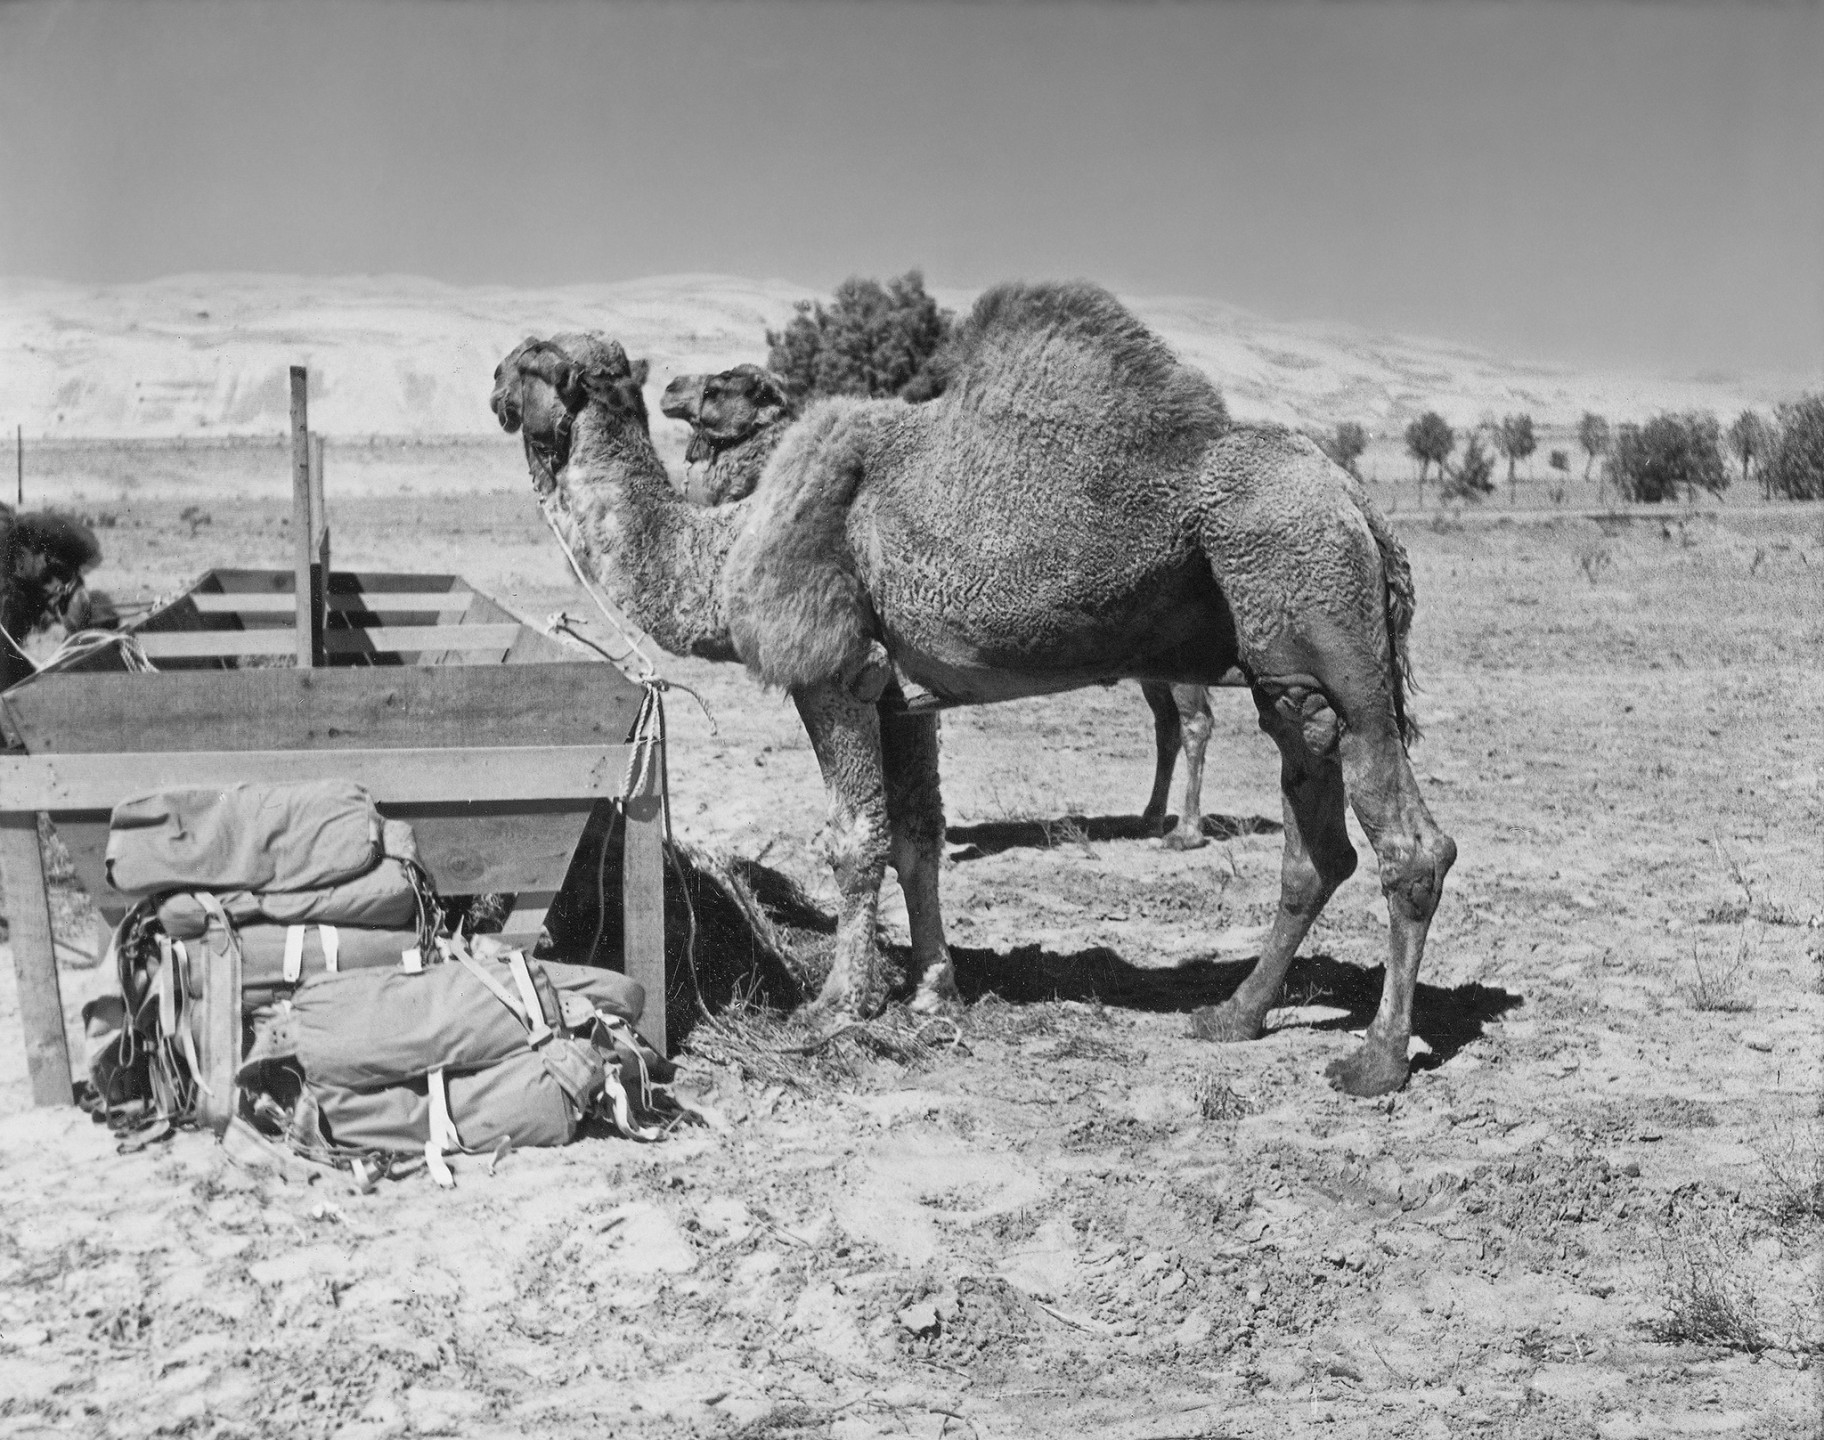 What's even more fascinating is that this was Sheik the camel's second time in the same film—he had also been in the 1926 version of Beau Geste, which also filmed in Yuma, Arizona!